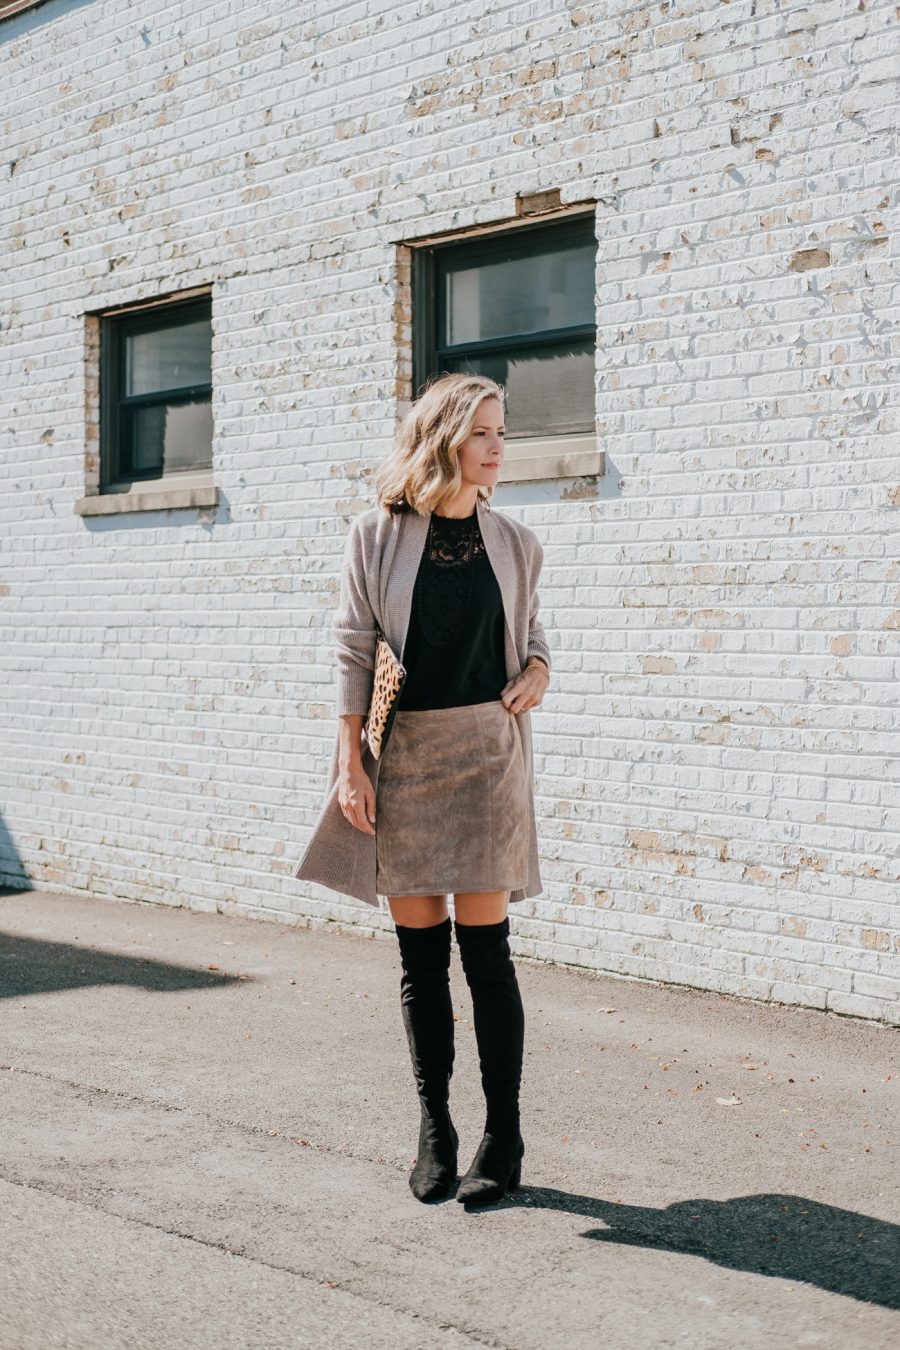 Cardigan, black top, brown suede skirt, leopard bag, over the knee boots